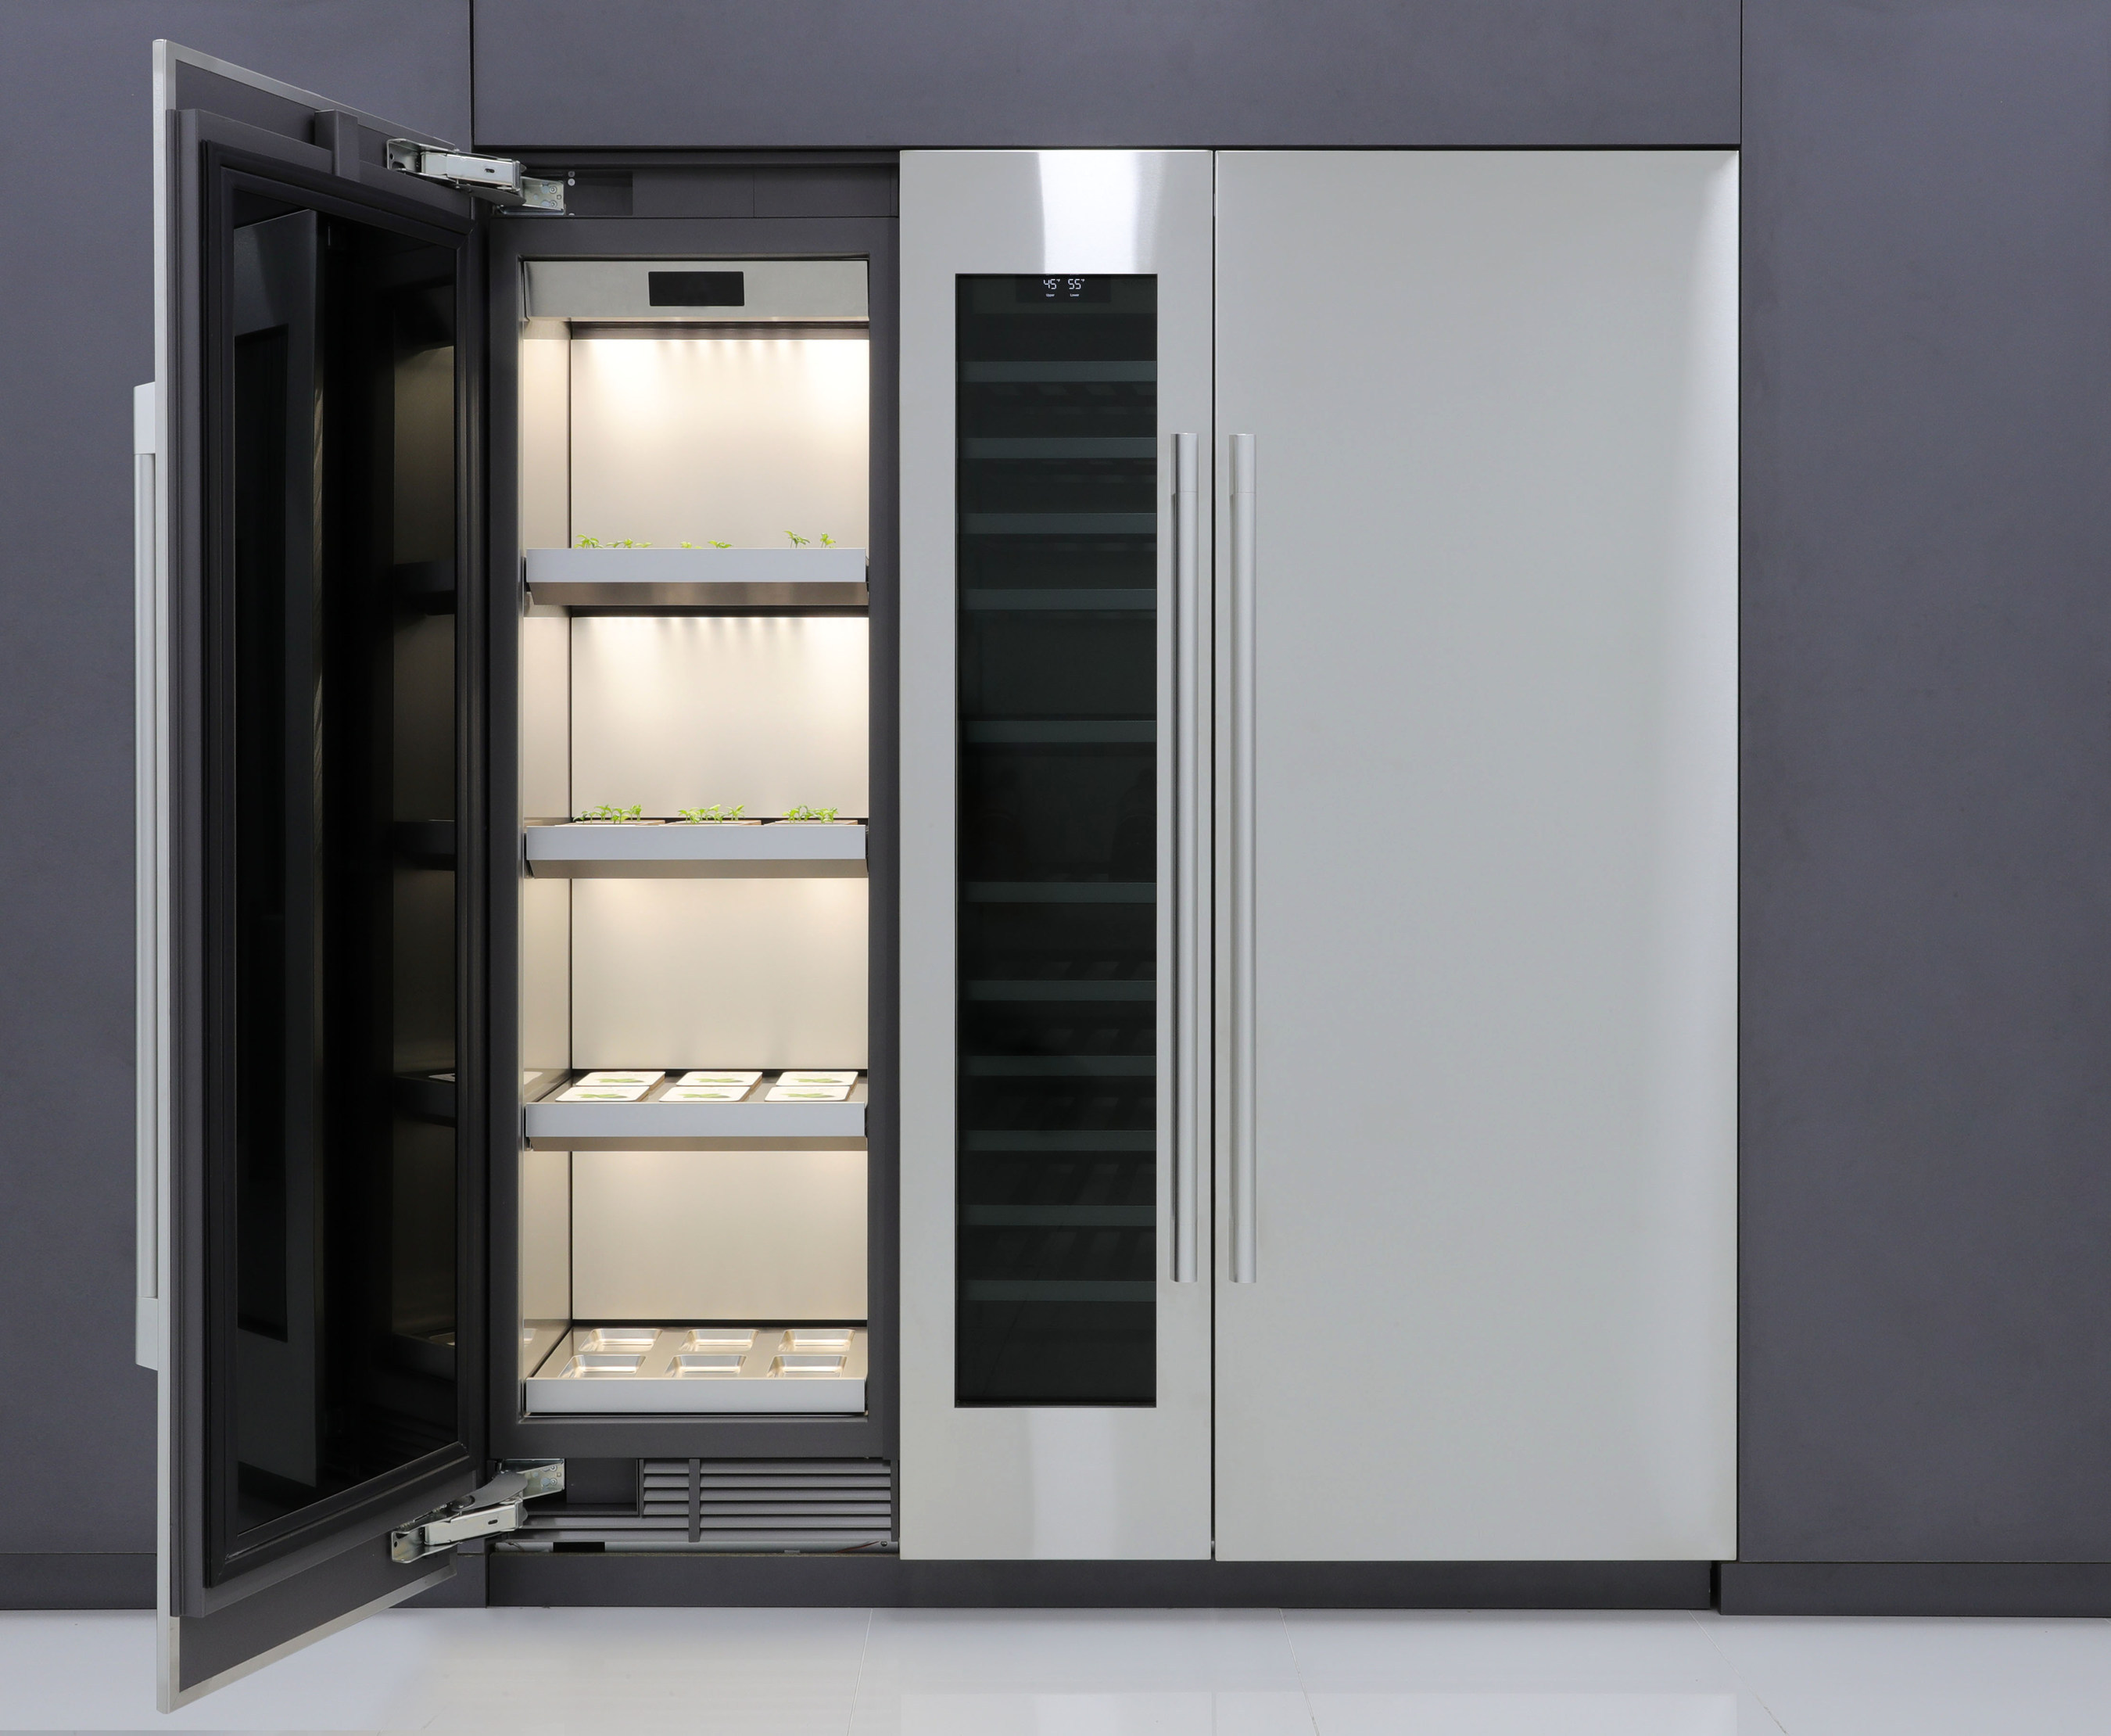 Refrigerator with side panel for growing plants.